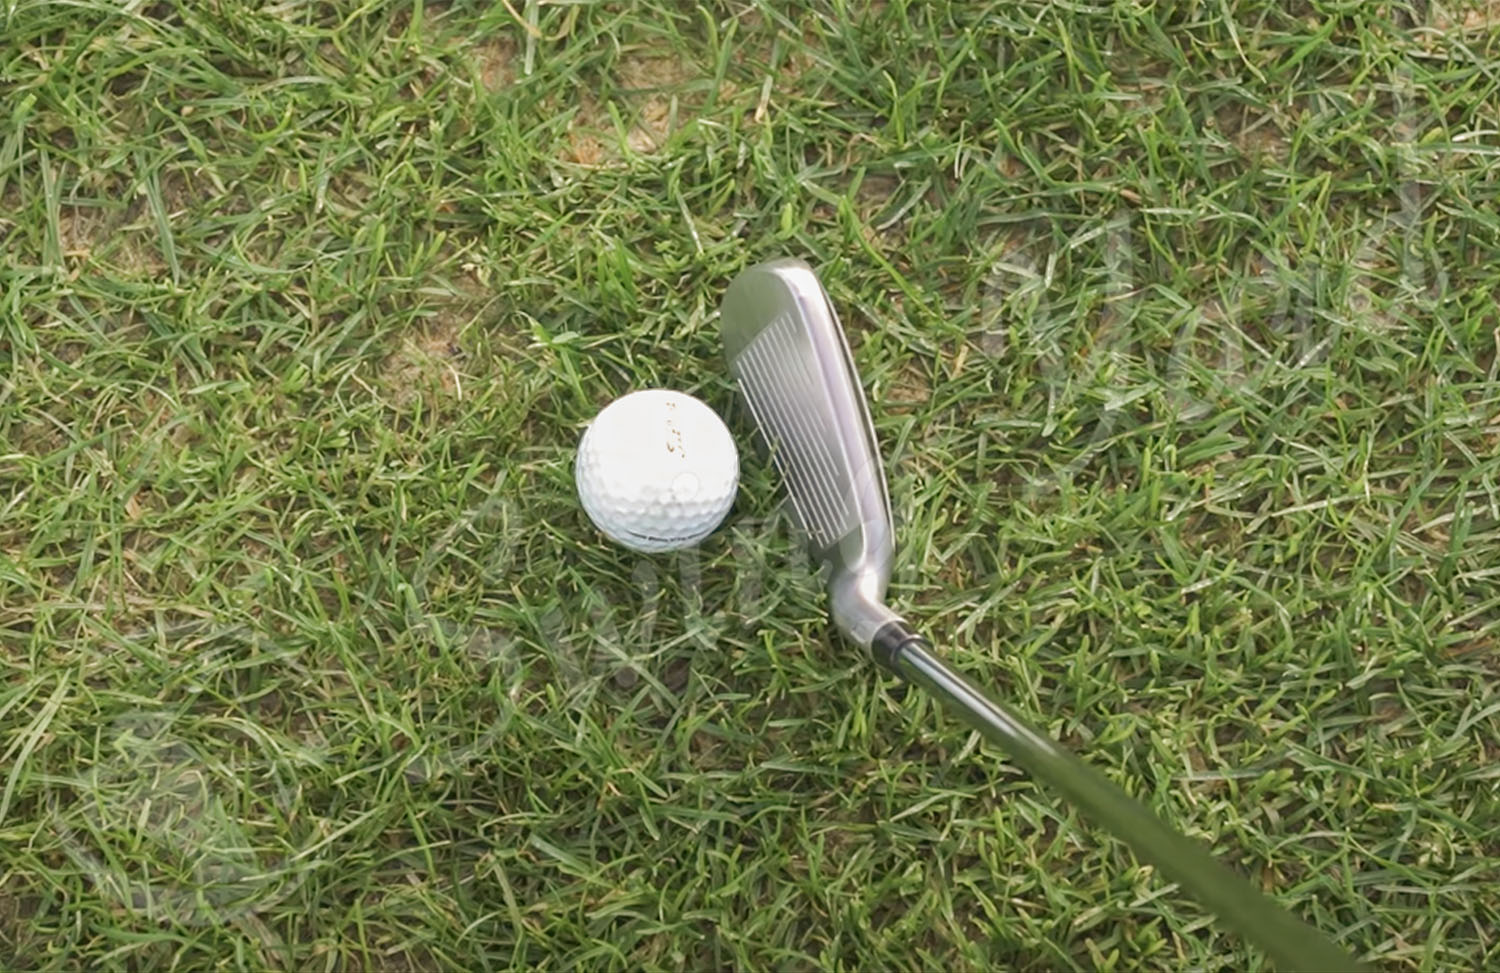 A TaylorMade Stealth HD Women Iron hitting a golf ball in the grass